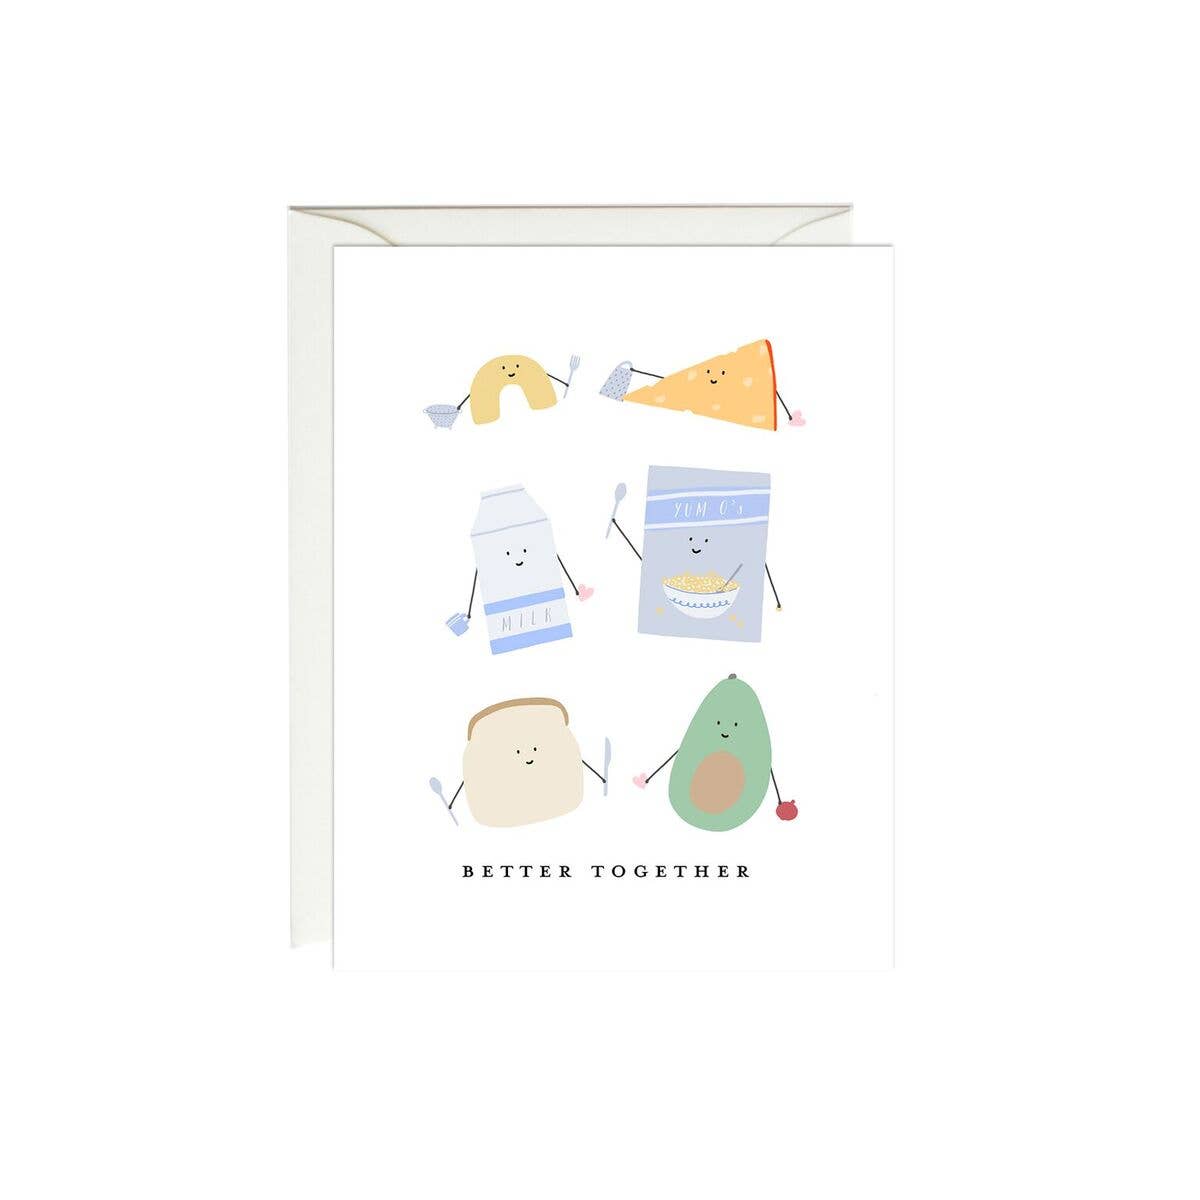 Love greeting card that reads "Better Together" and has images of food pairings such as macaroni and cheese, milk and cereal and avocado and toast